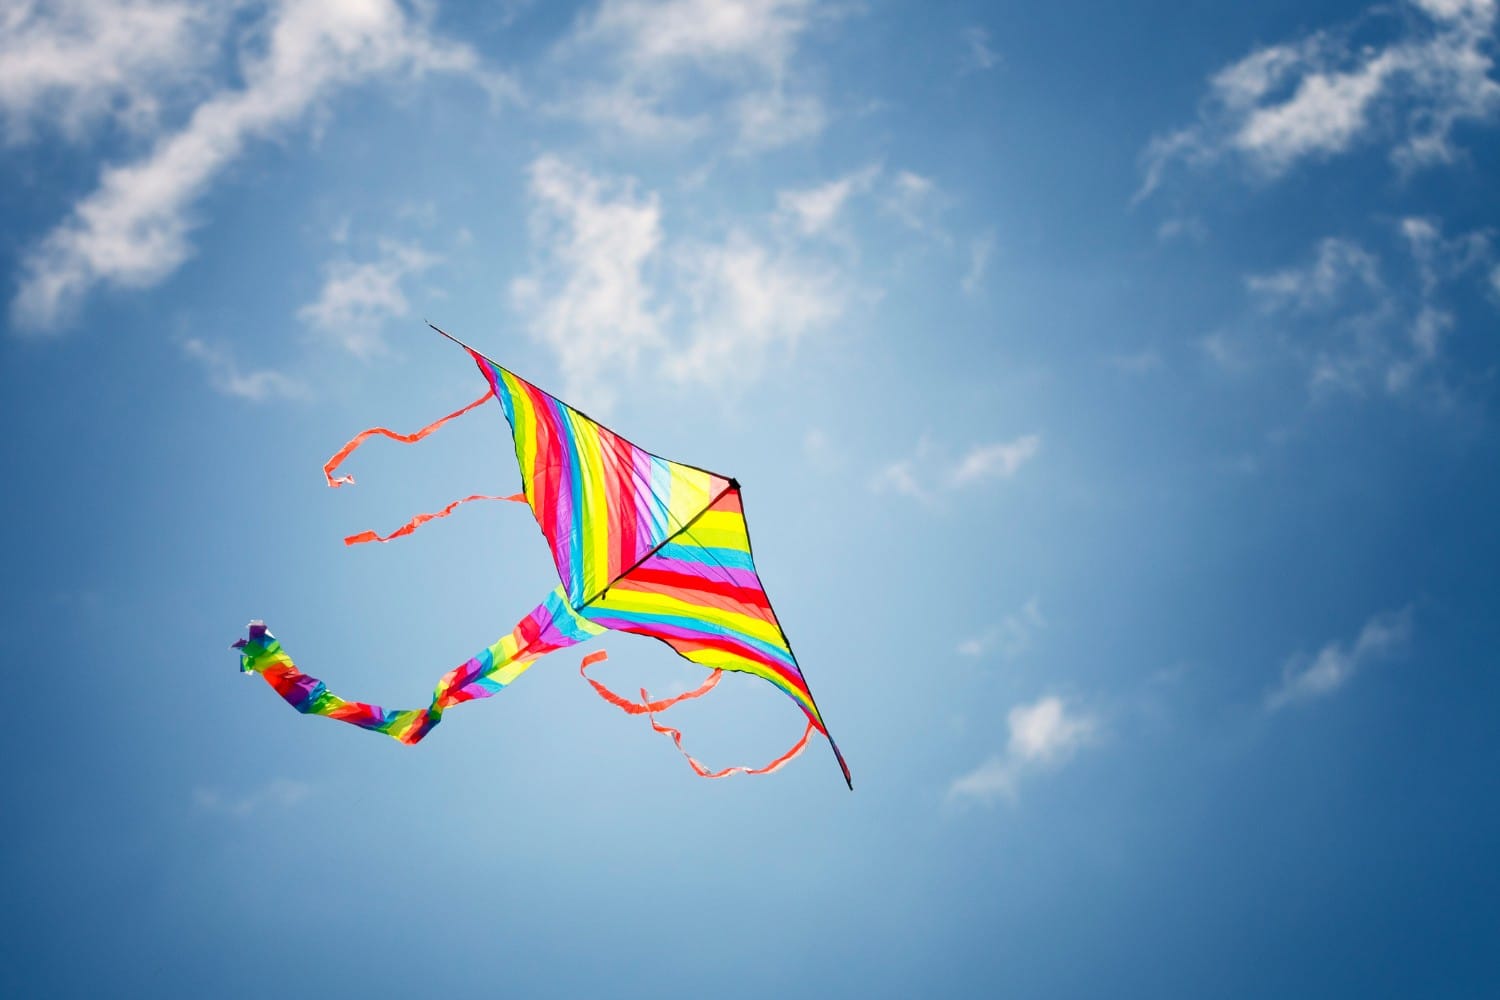 How to Get the Most From the Atlanta World Kite Festival in Piedmont